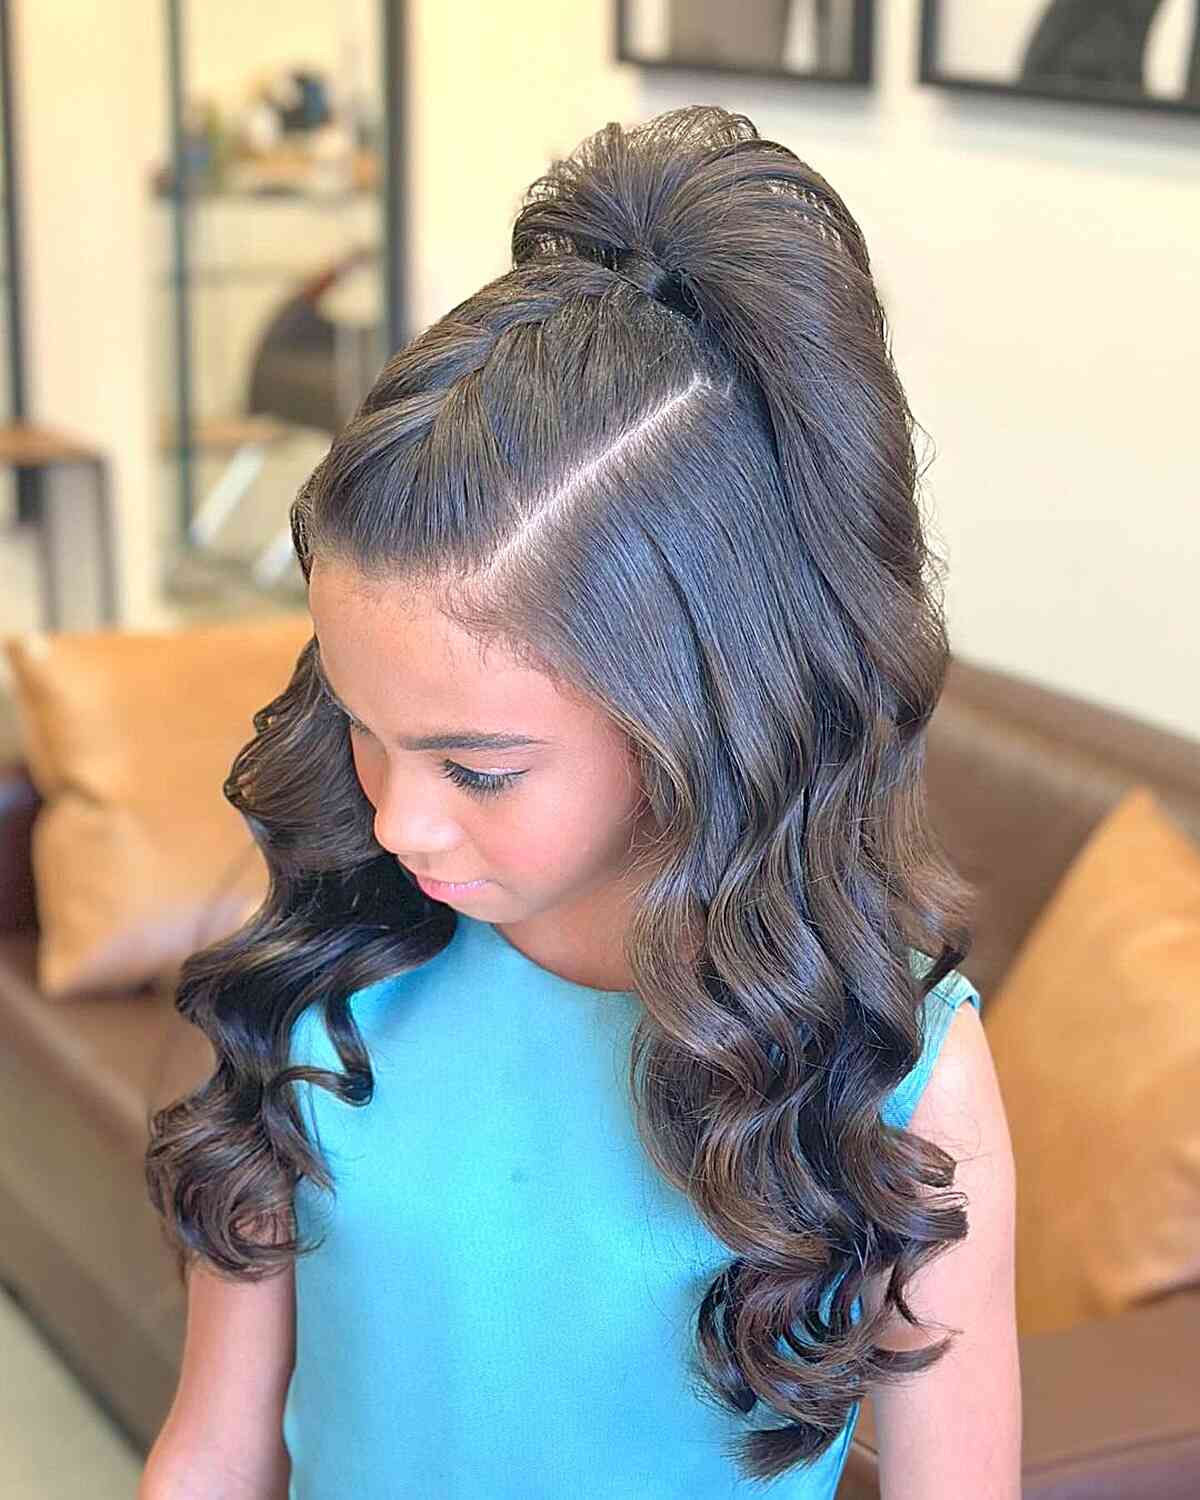 Trendy Wholesale kids braids with weave For Confident Styles